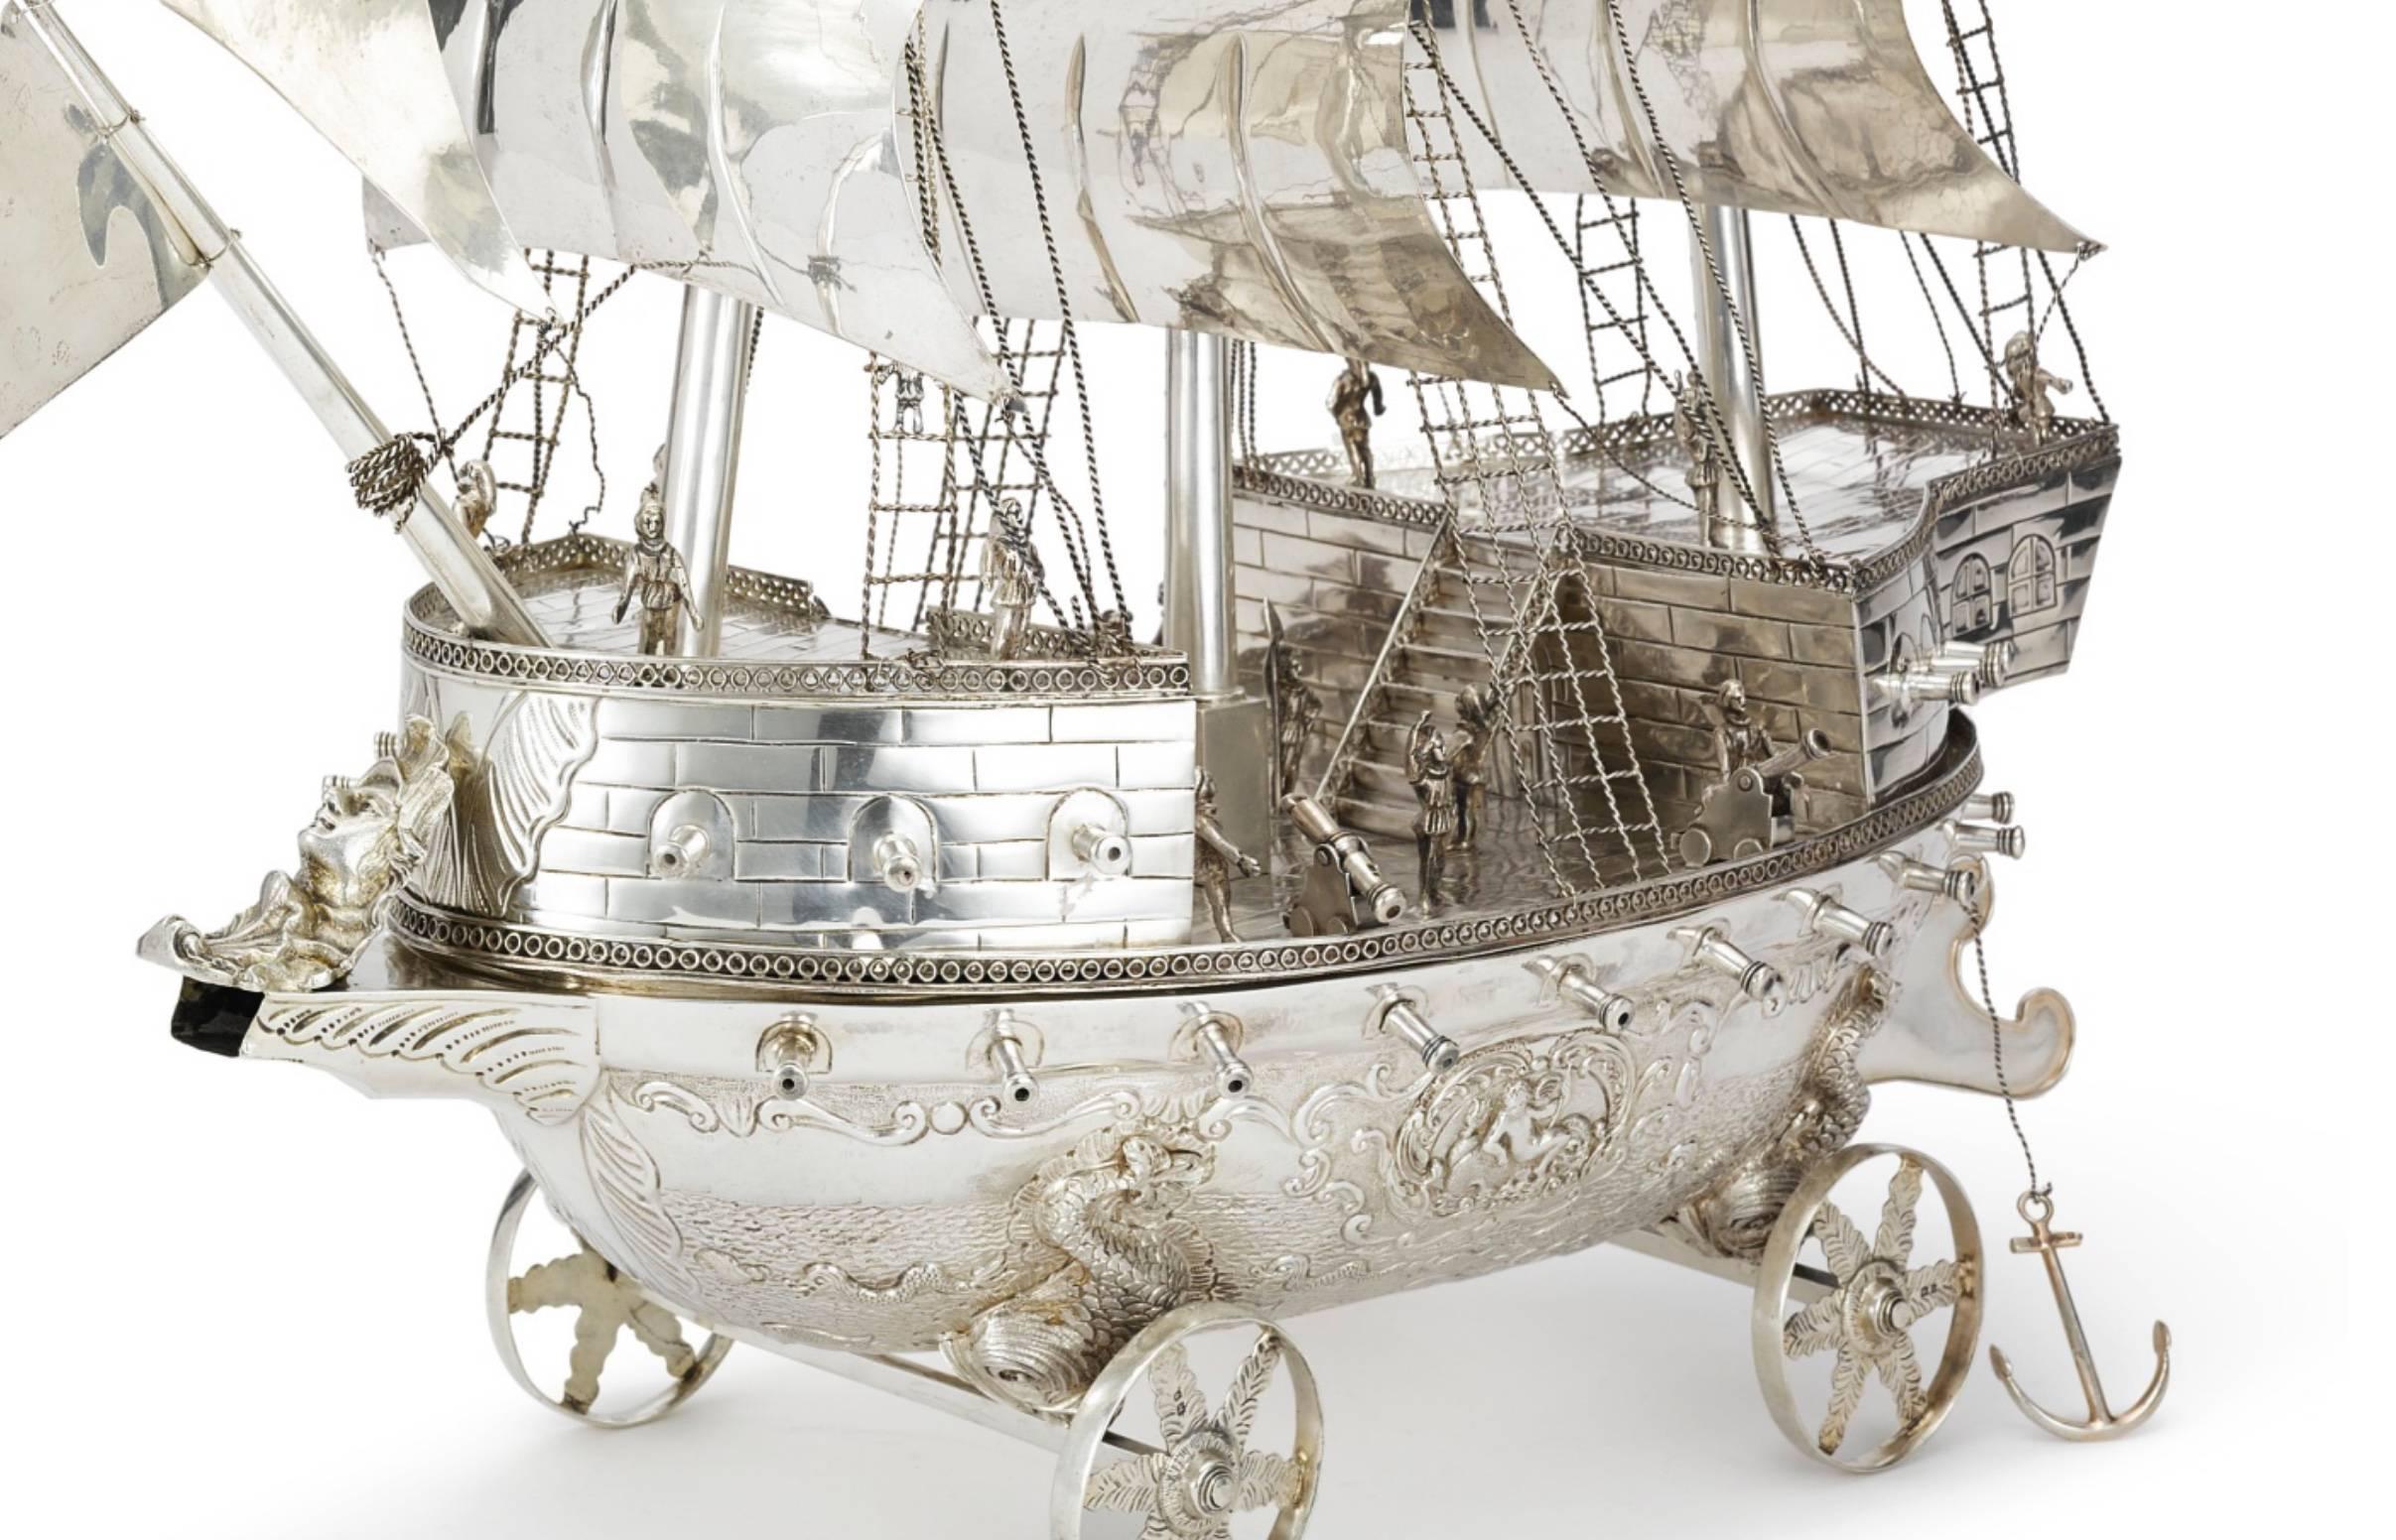 An absolutely stunning and rare sterling silver Neff. Superb quality and detail, and an unusual size.
This three masted neff is fully manned and rigged with sailors, the deck detachable, the hull with putti riding dolphins and numerous fish and